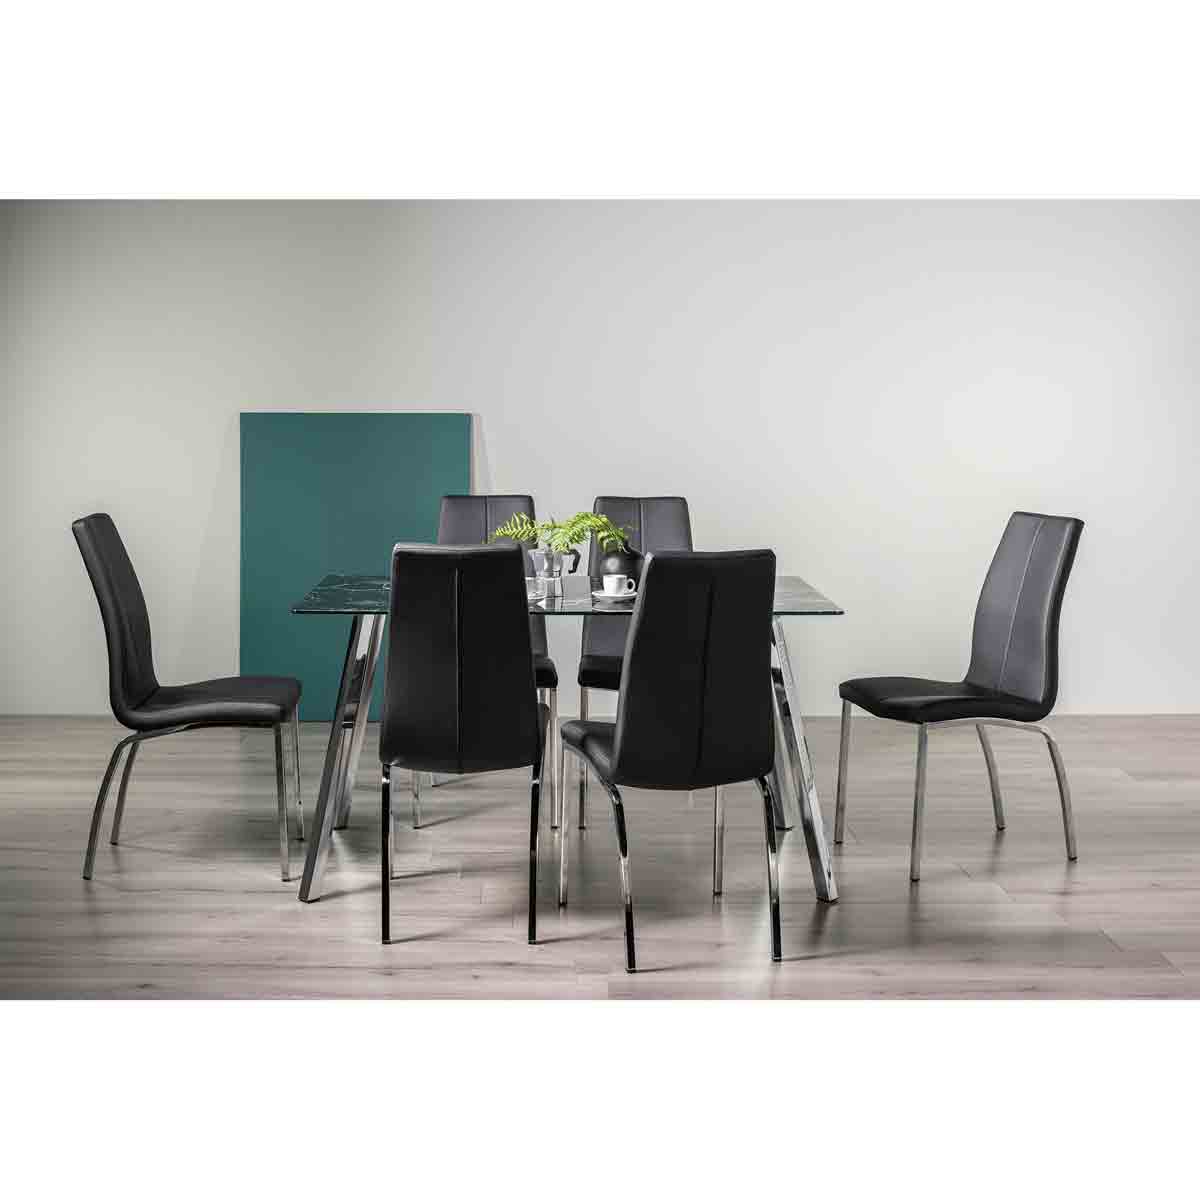 Bentley Designs Rimini Black Marble Effect Tempered Glass 6 Seater Dining Table & 6 Benton Black Faux Leather Chairs With Shiny Nickel Legs